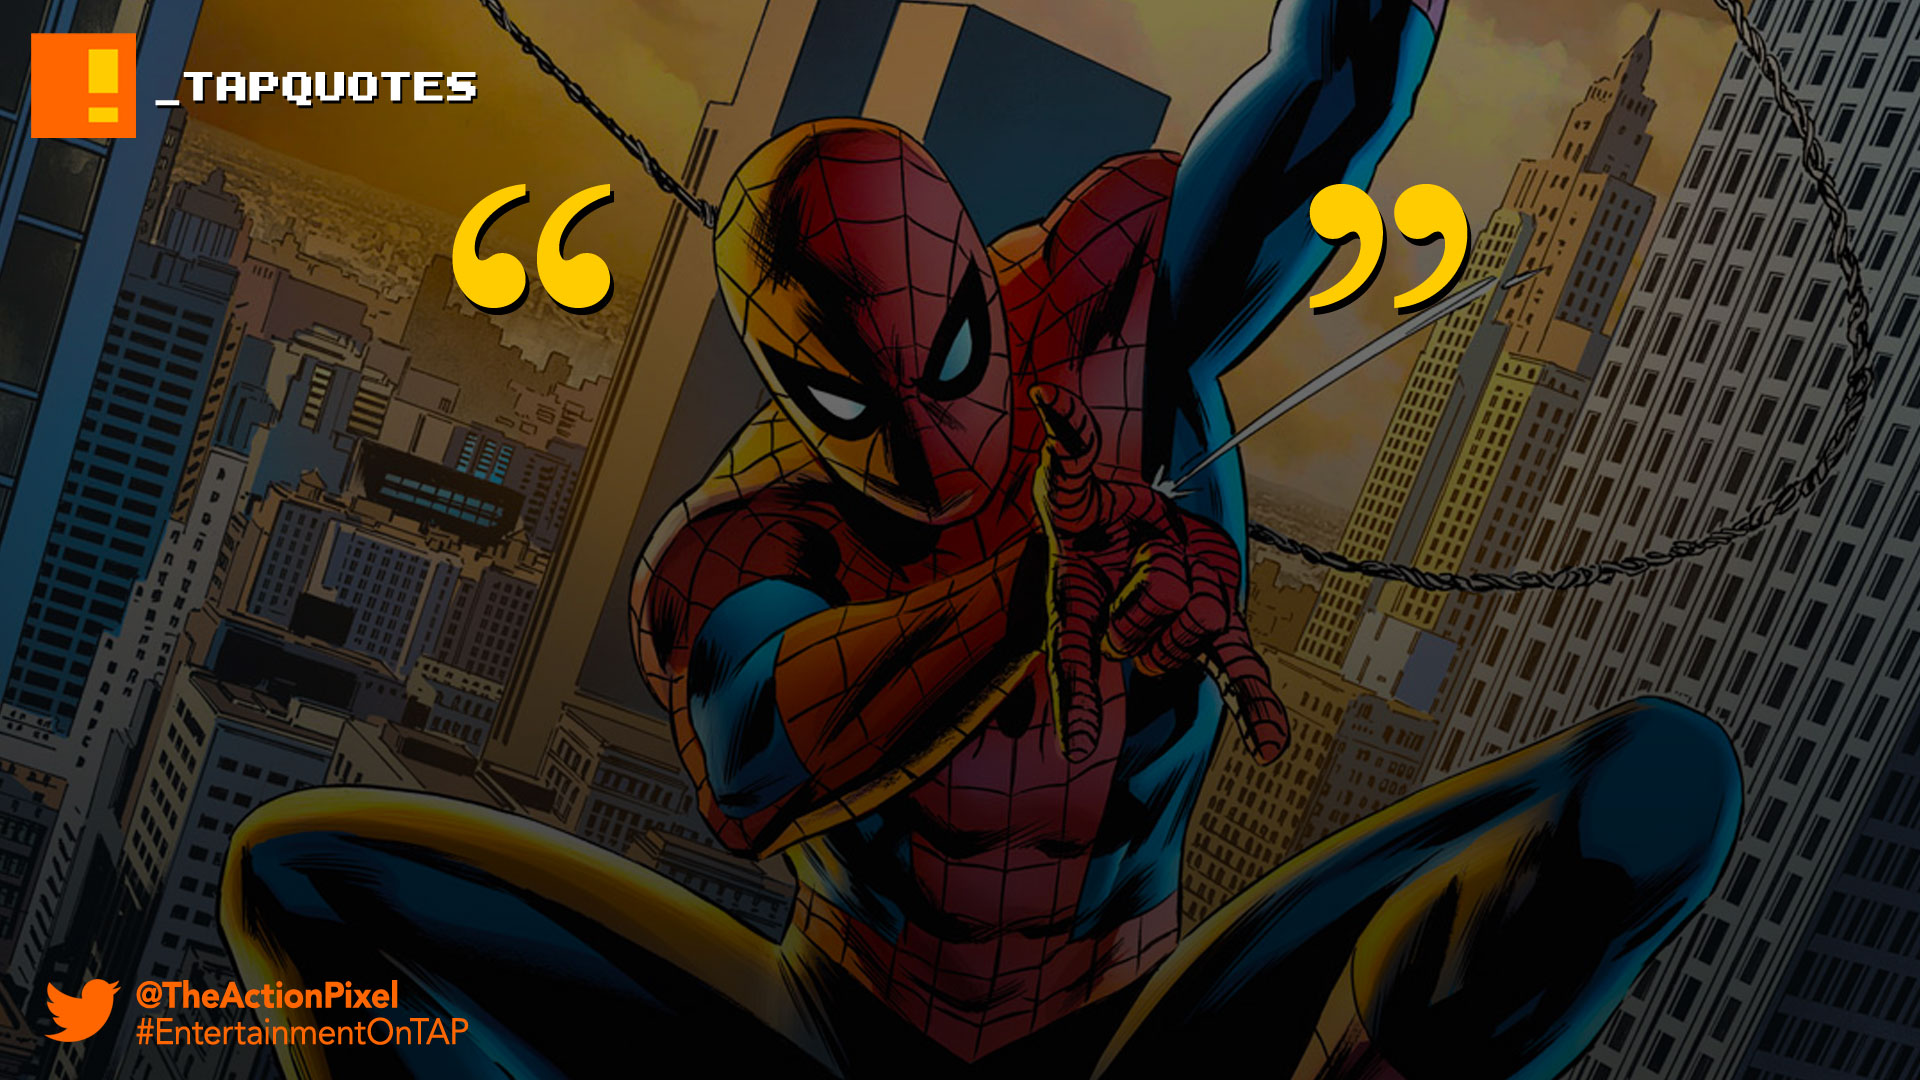 TAPQuotes, tap quotes, quotations, spider-man, spiderman, voltaire, marvel, with great power there must also come – great responsibility, the amazing spider-man,